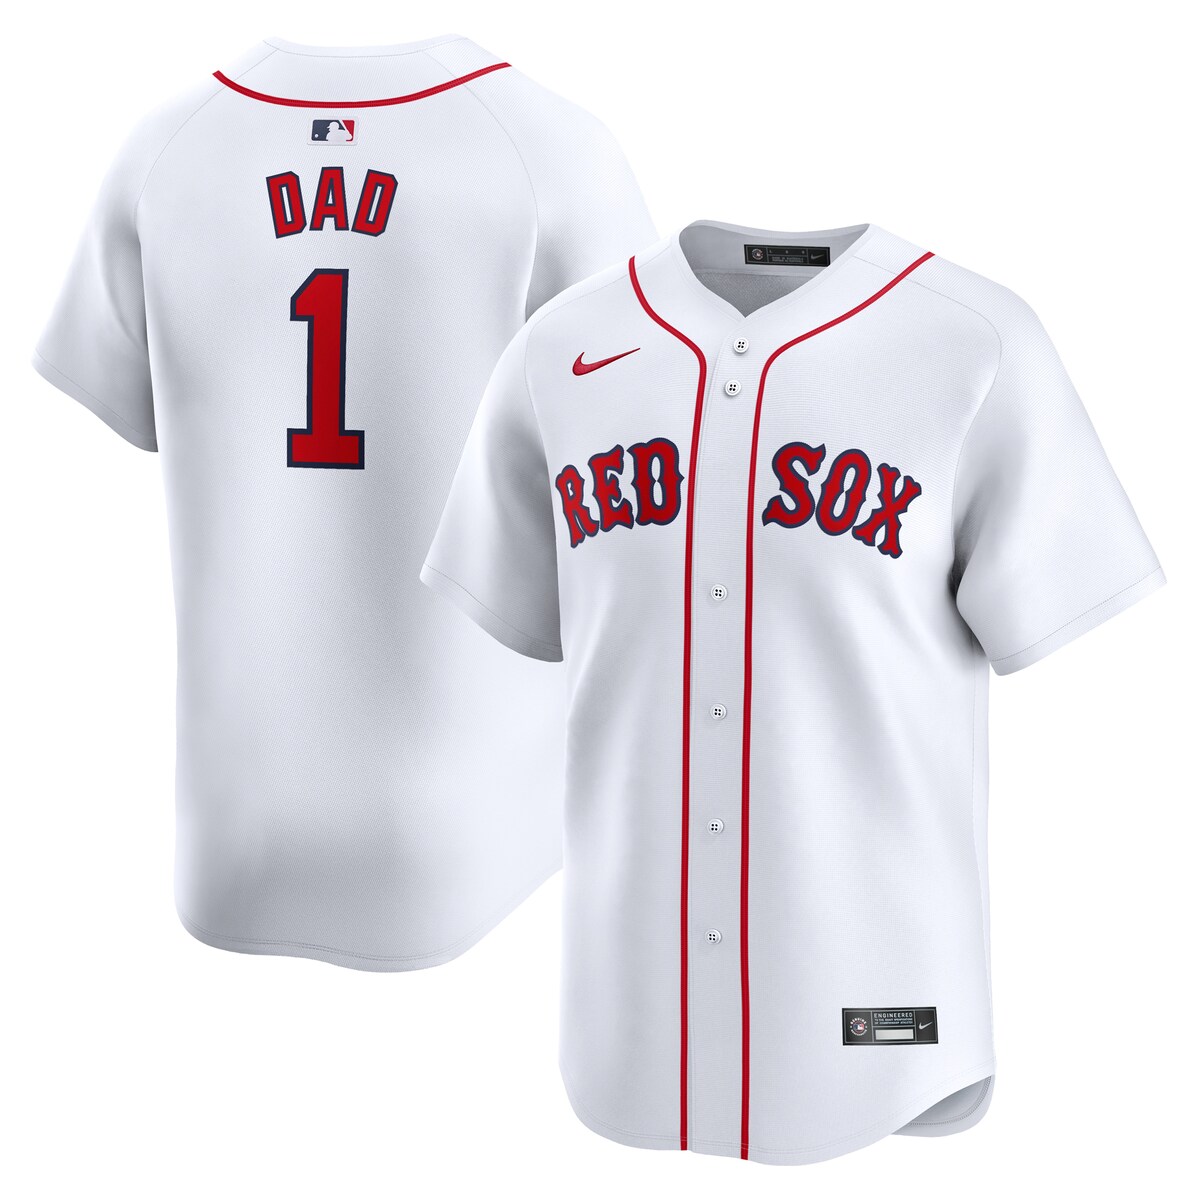 MLB bh\bNX z[ ~ebh jtH[ Nike iCL Y zCg (2024 Men's Ltd Father's Day #1 Dad APP - FTF NTP Master Style)